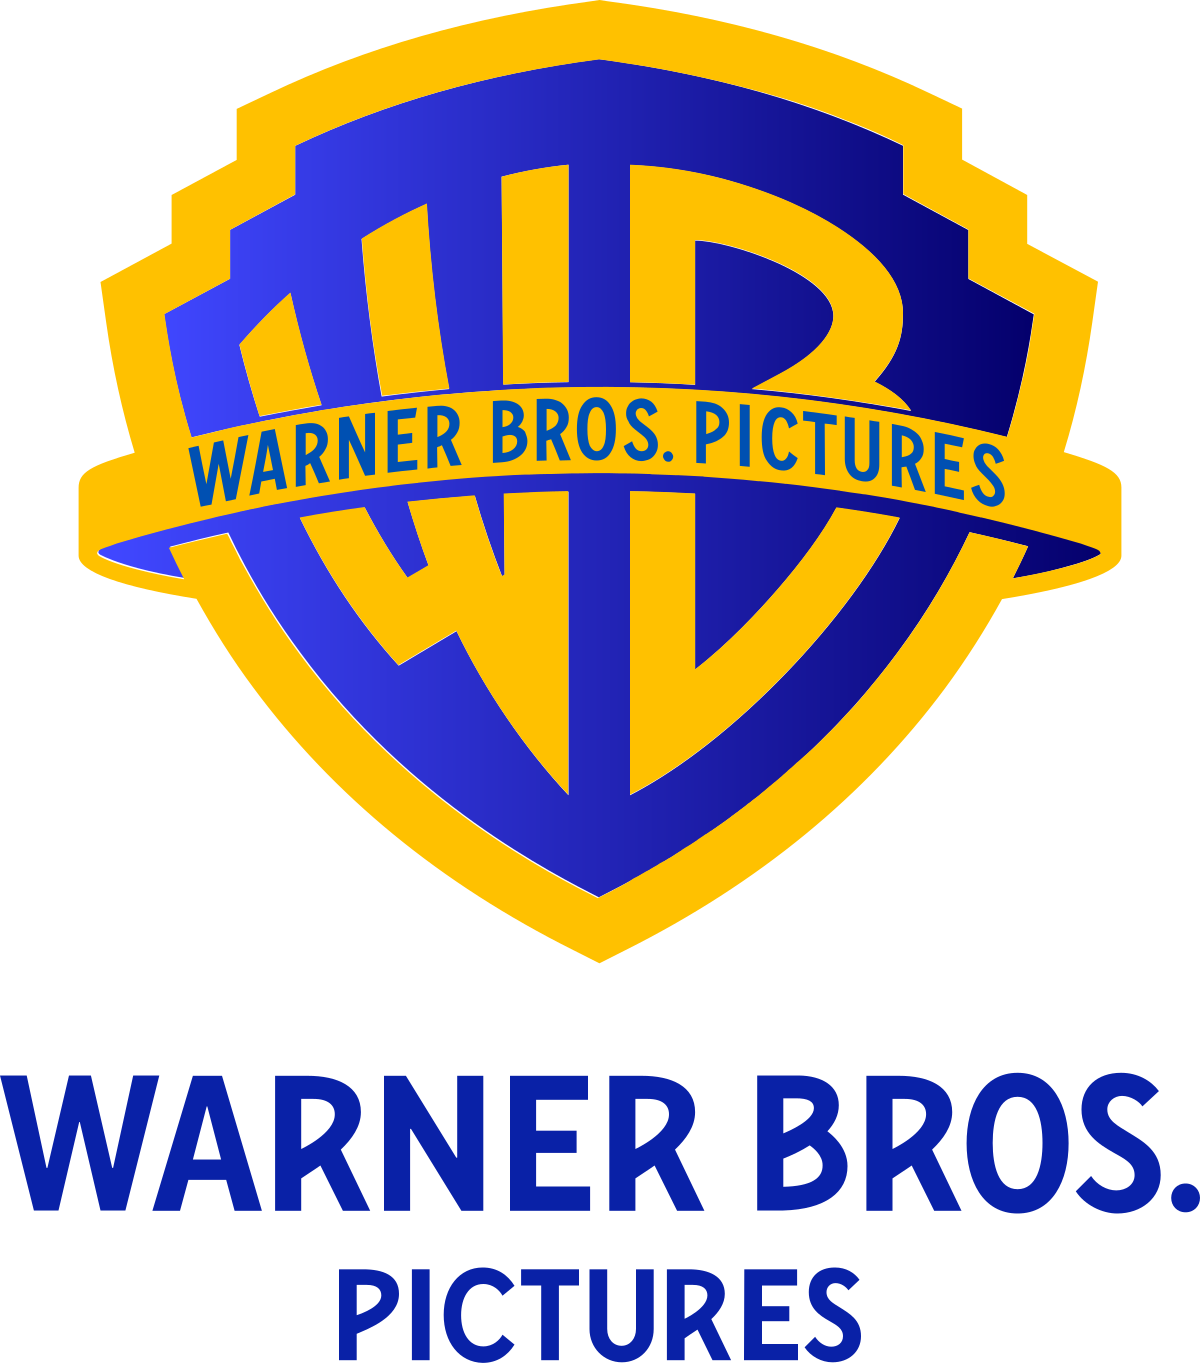 File:Warner Bros. Discovery (symbol).svg - Wikimedia Commons